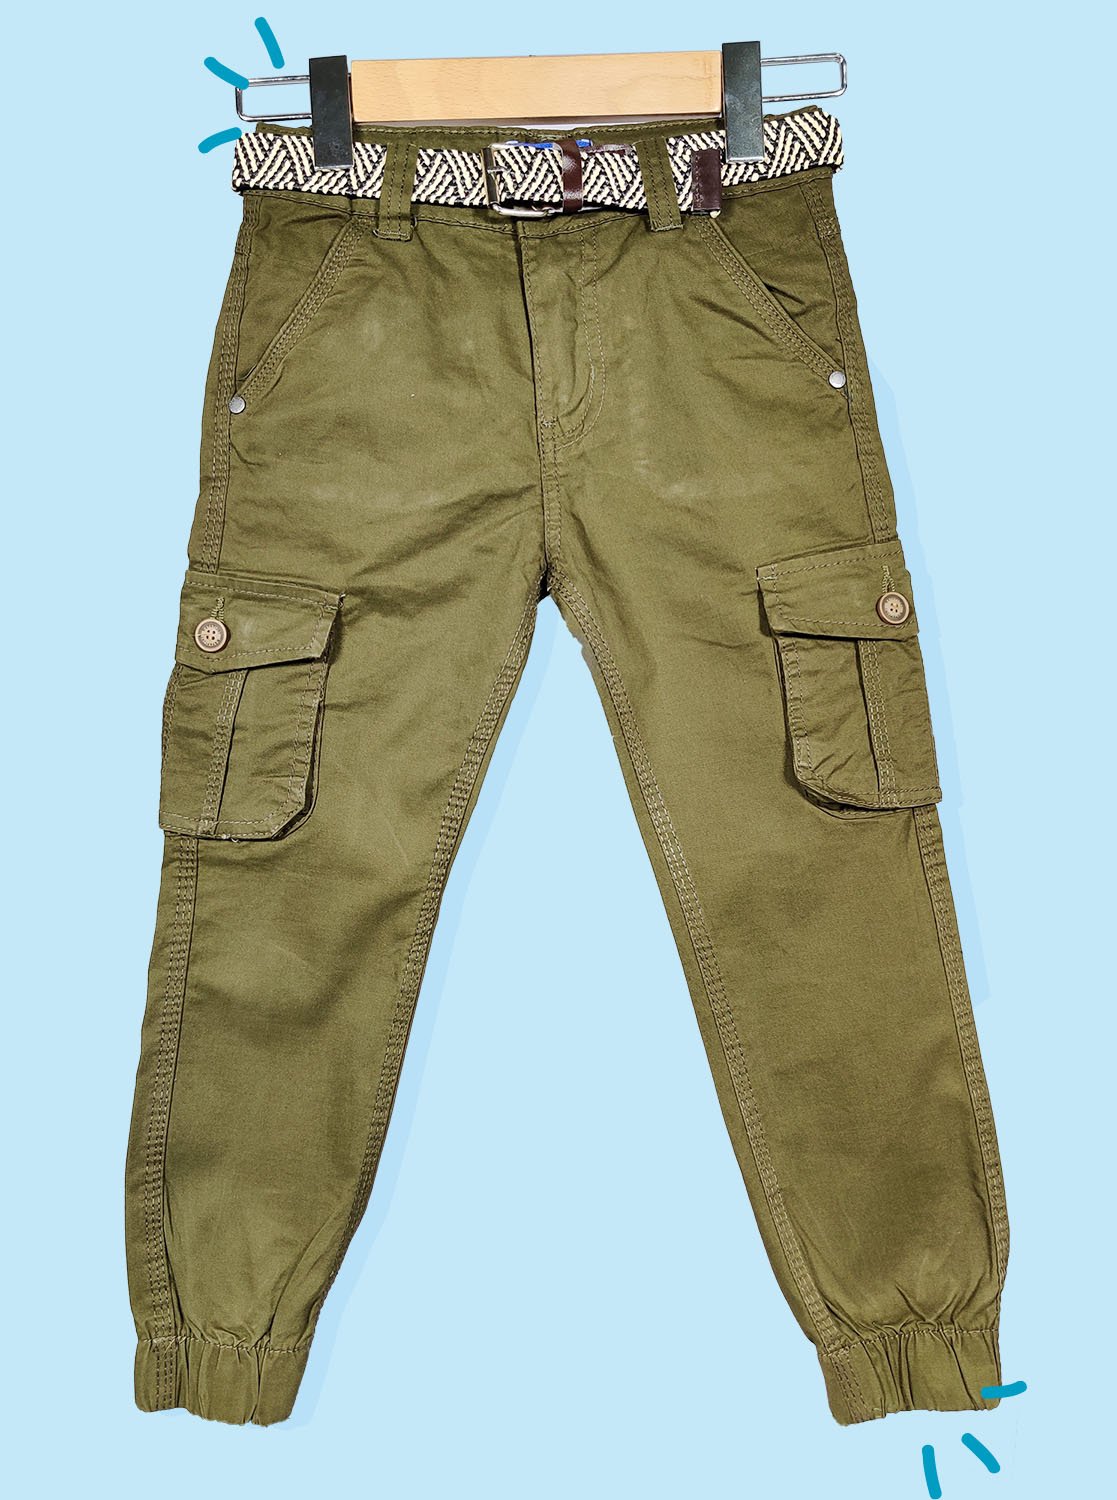 Ayolanni Army Green Cargo Pants Men's Cargo Trousers Work Wear Combat  Safety Cargo 6 Pocket Full Pants Large - Walmart.com